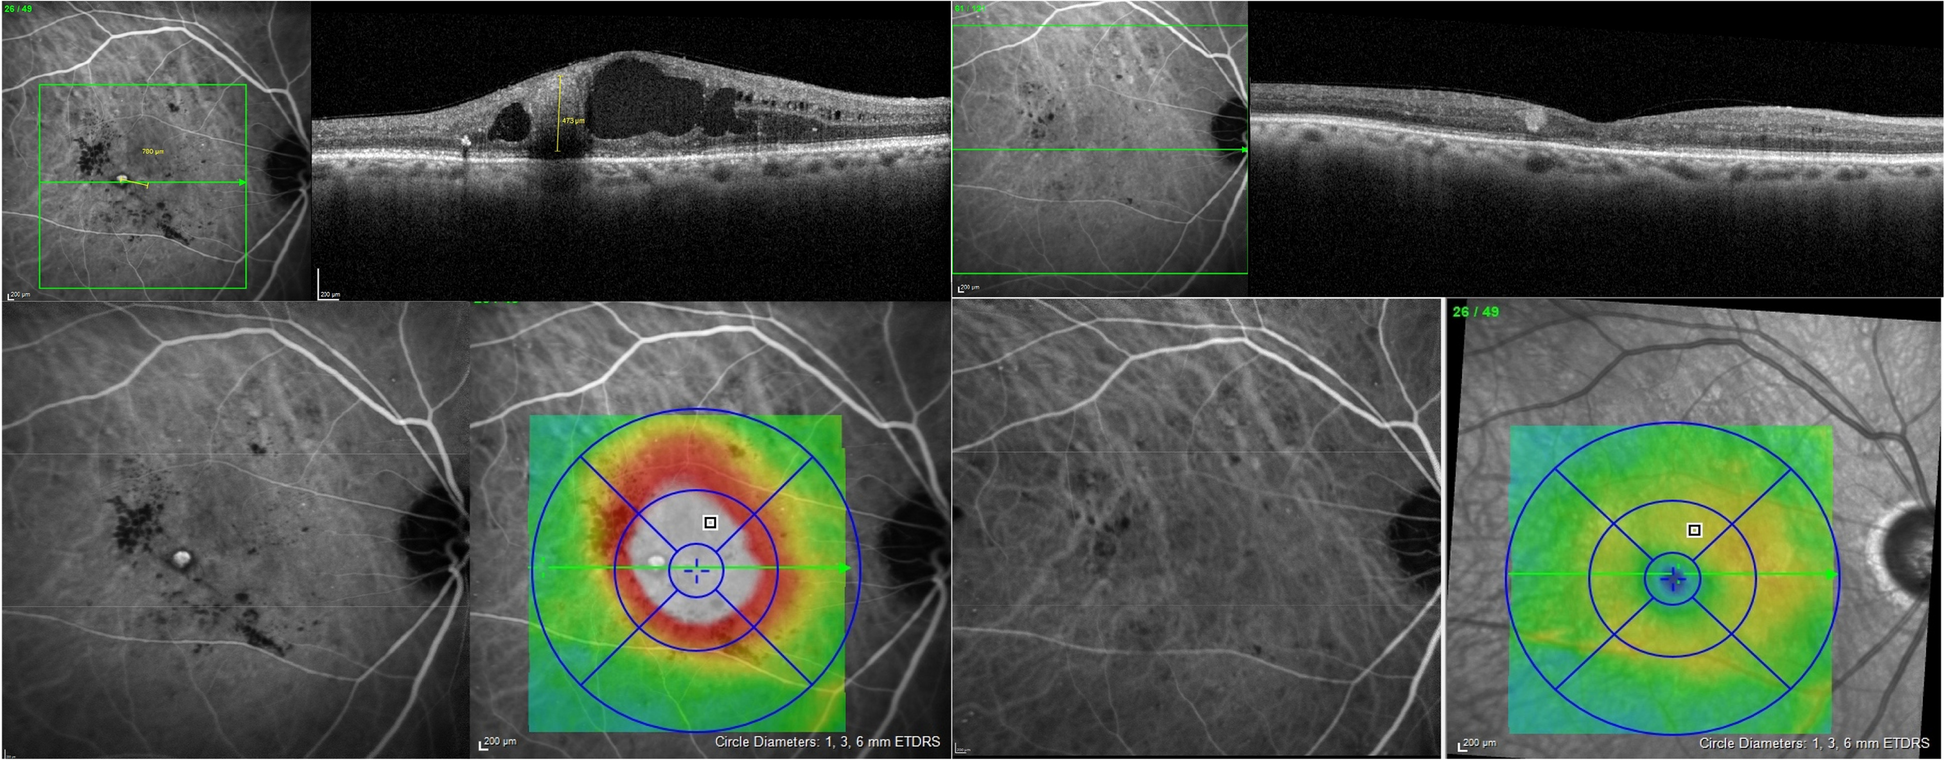 Photocoagulation or sham laser in addition to conventional anti-VEGF therapy in macular edema associated with TelCaps due to diabetic macular edema or retinal vein occlusion (TalaDME): a study protocol for a multicentric, French, two-group, non-commercial, active-control, observer-masked, non-inferiority, randomized controlled clinical trial